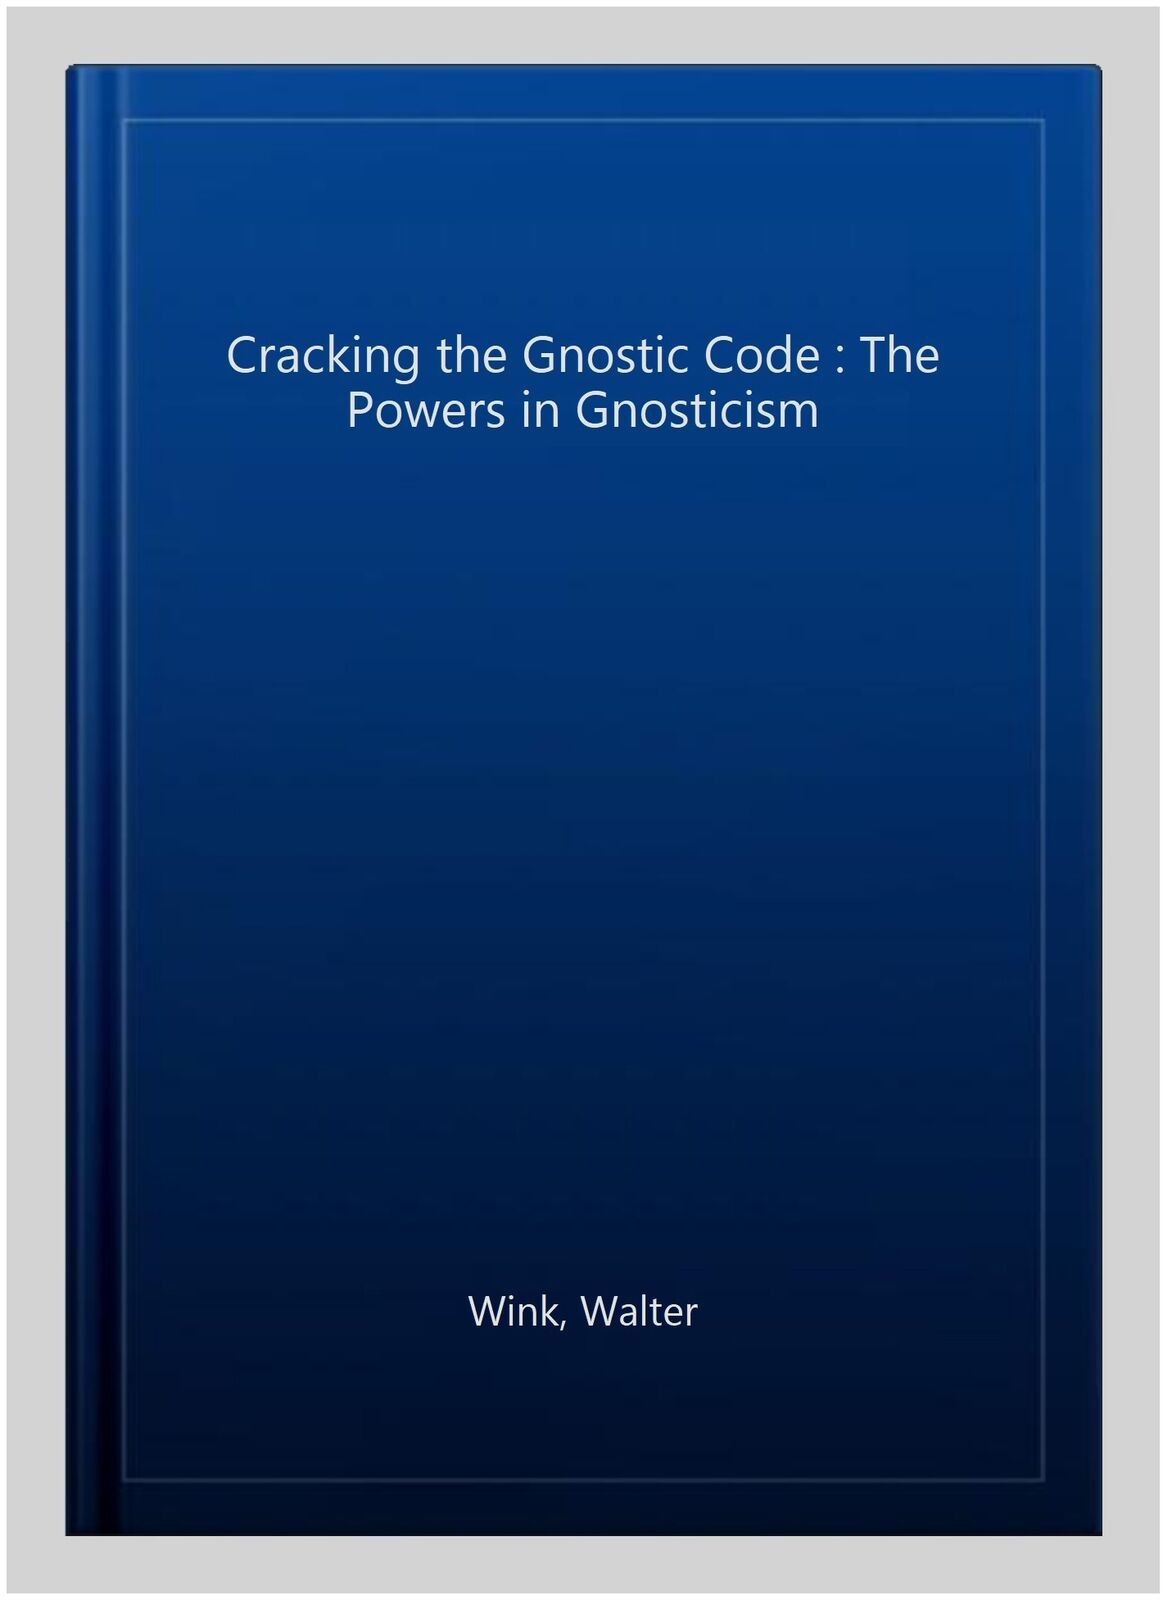 Cracking the Gnostic Code: The Powers in Gnosticism